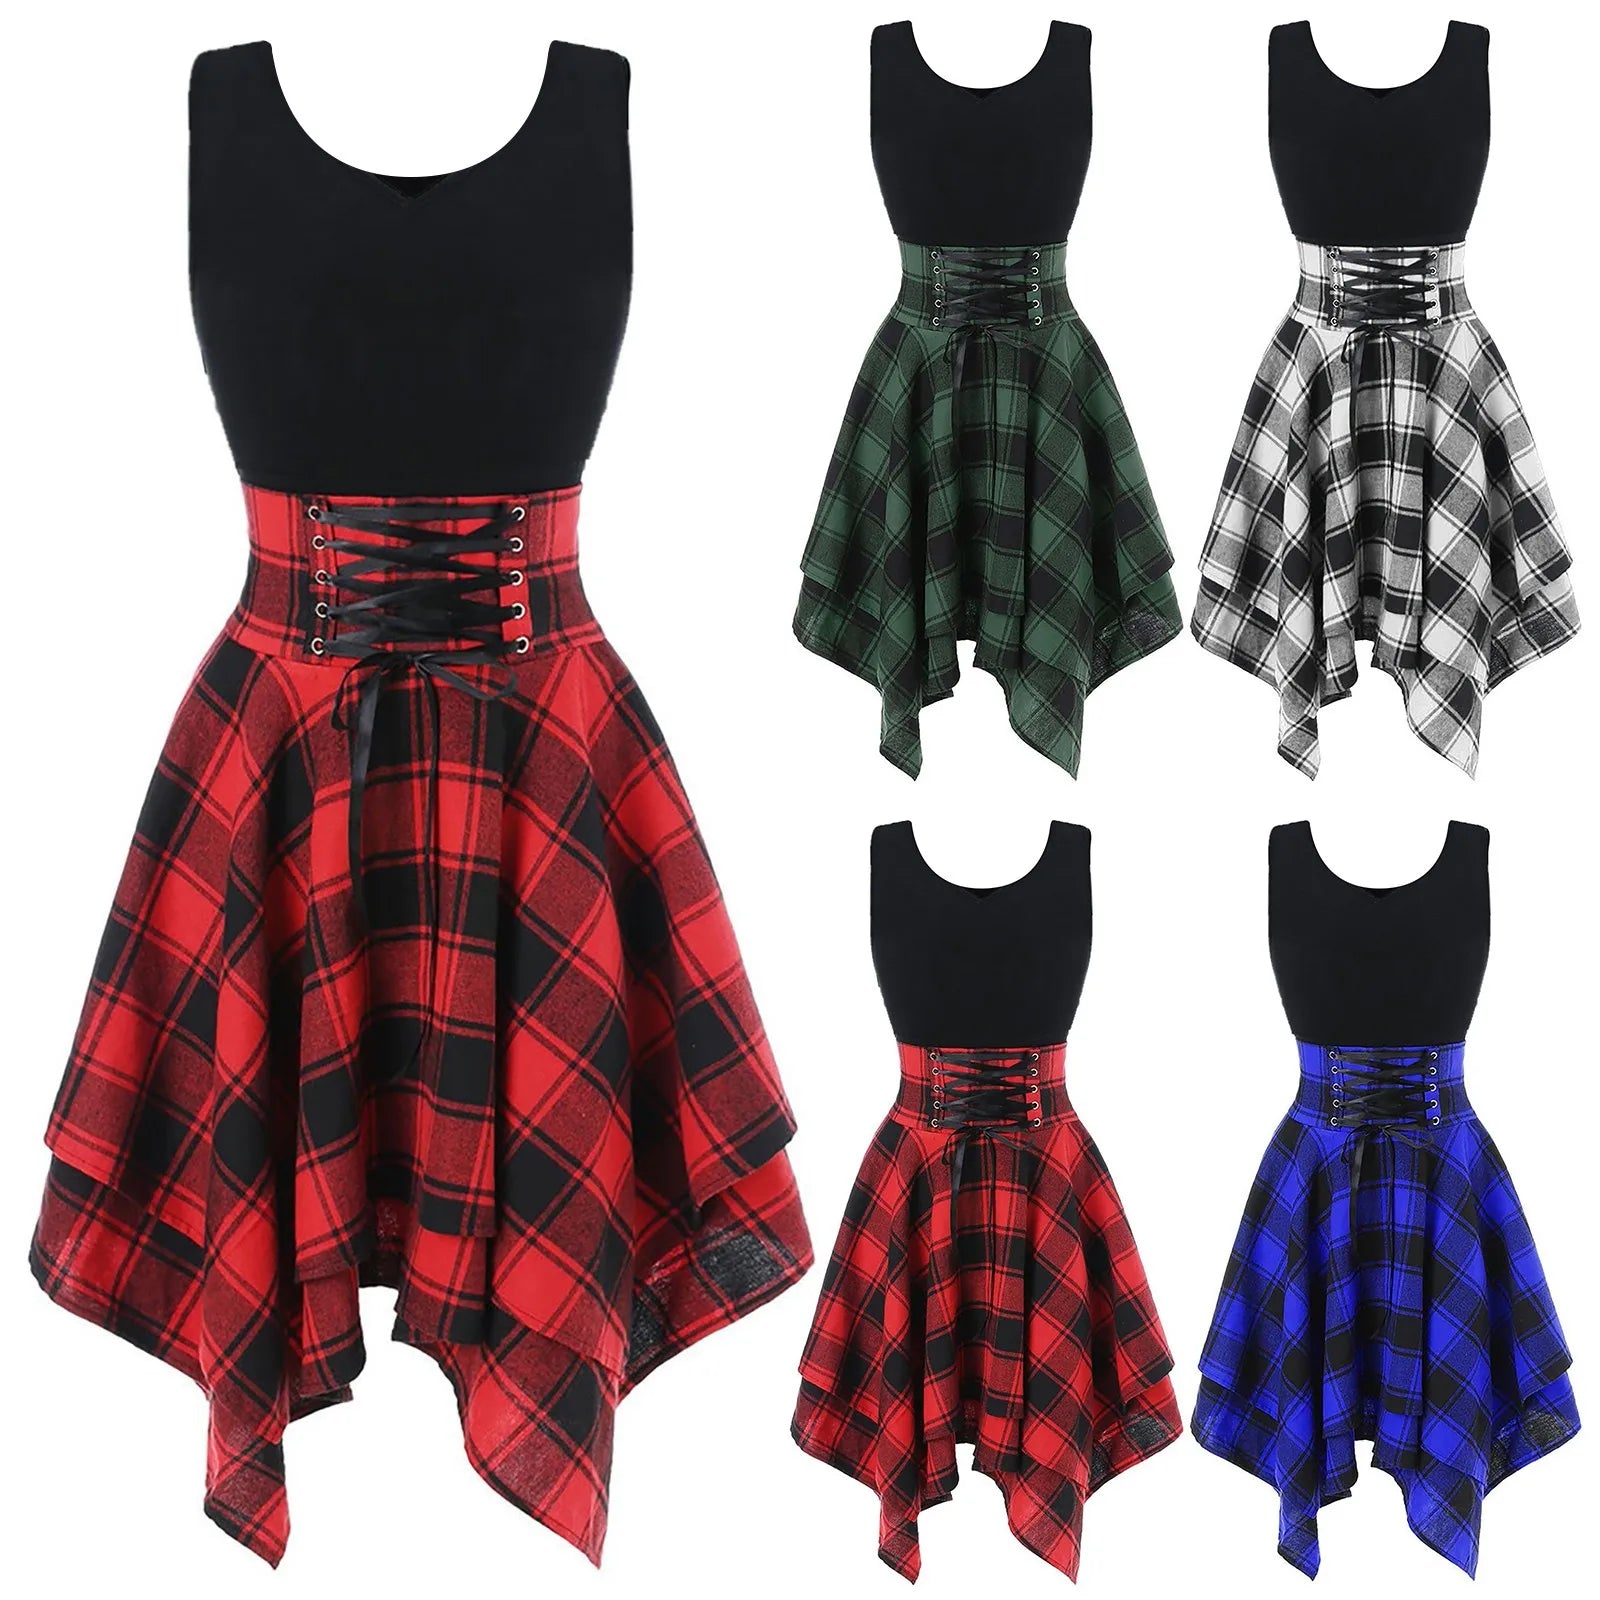 Dress For Woman Elegant Lace Up Party Dresses Women Summer Preppy Cross Up Plaid Mini Holiday Gothic Clothing Sundress Vestidos